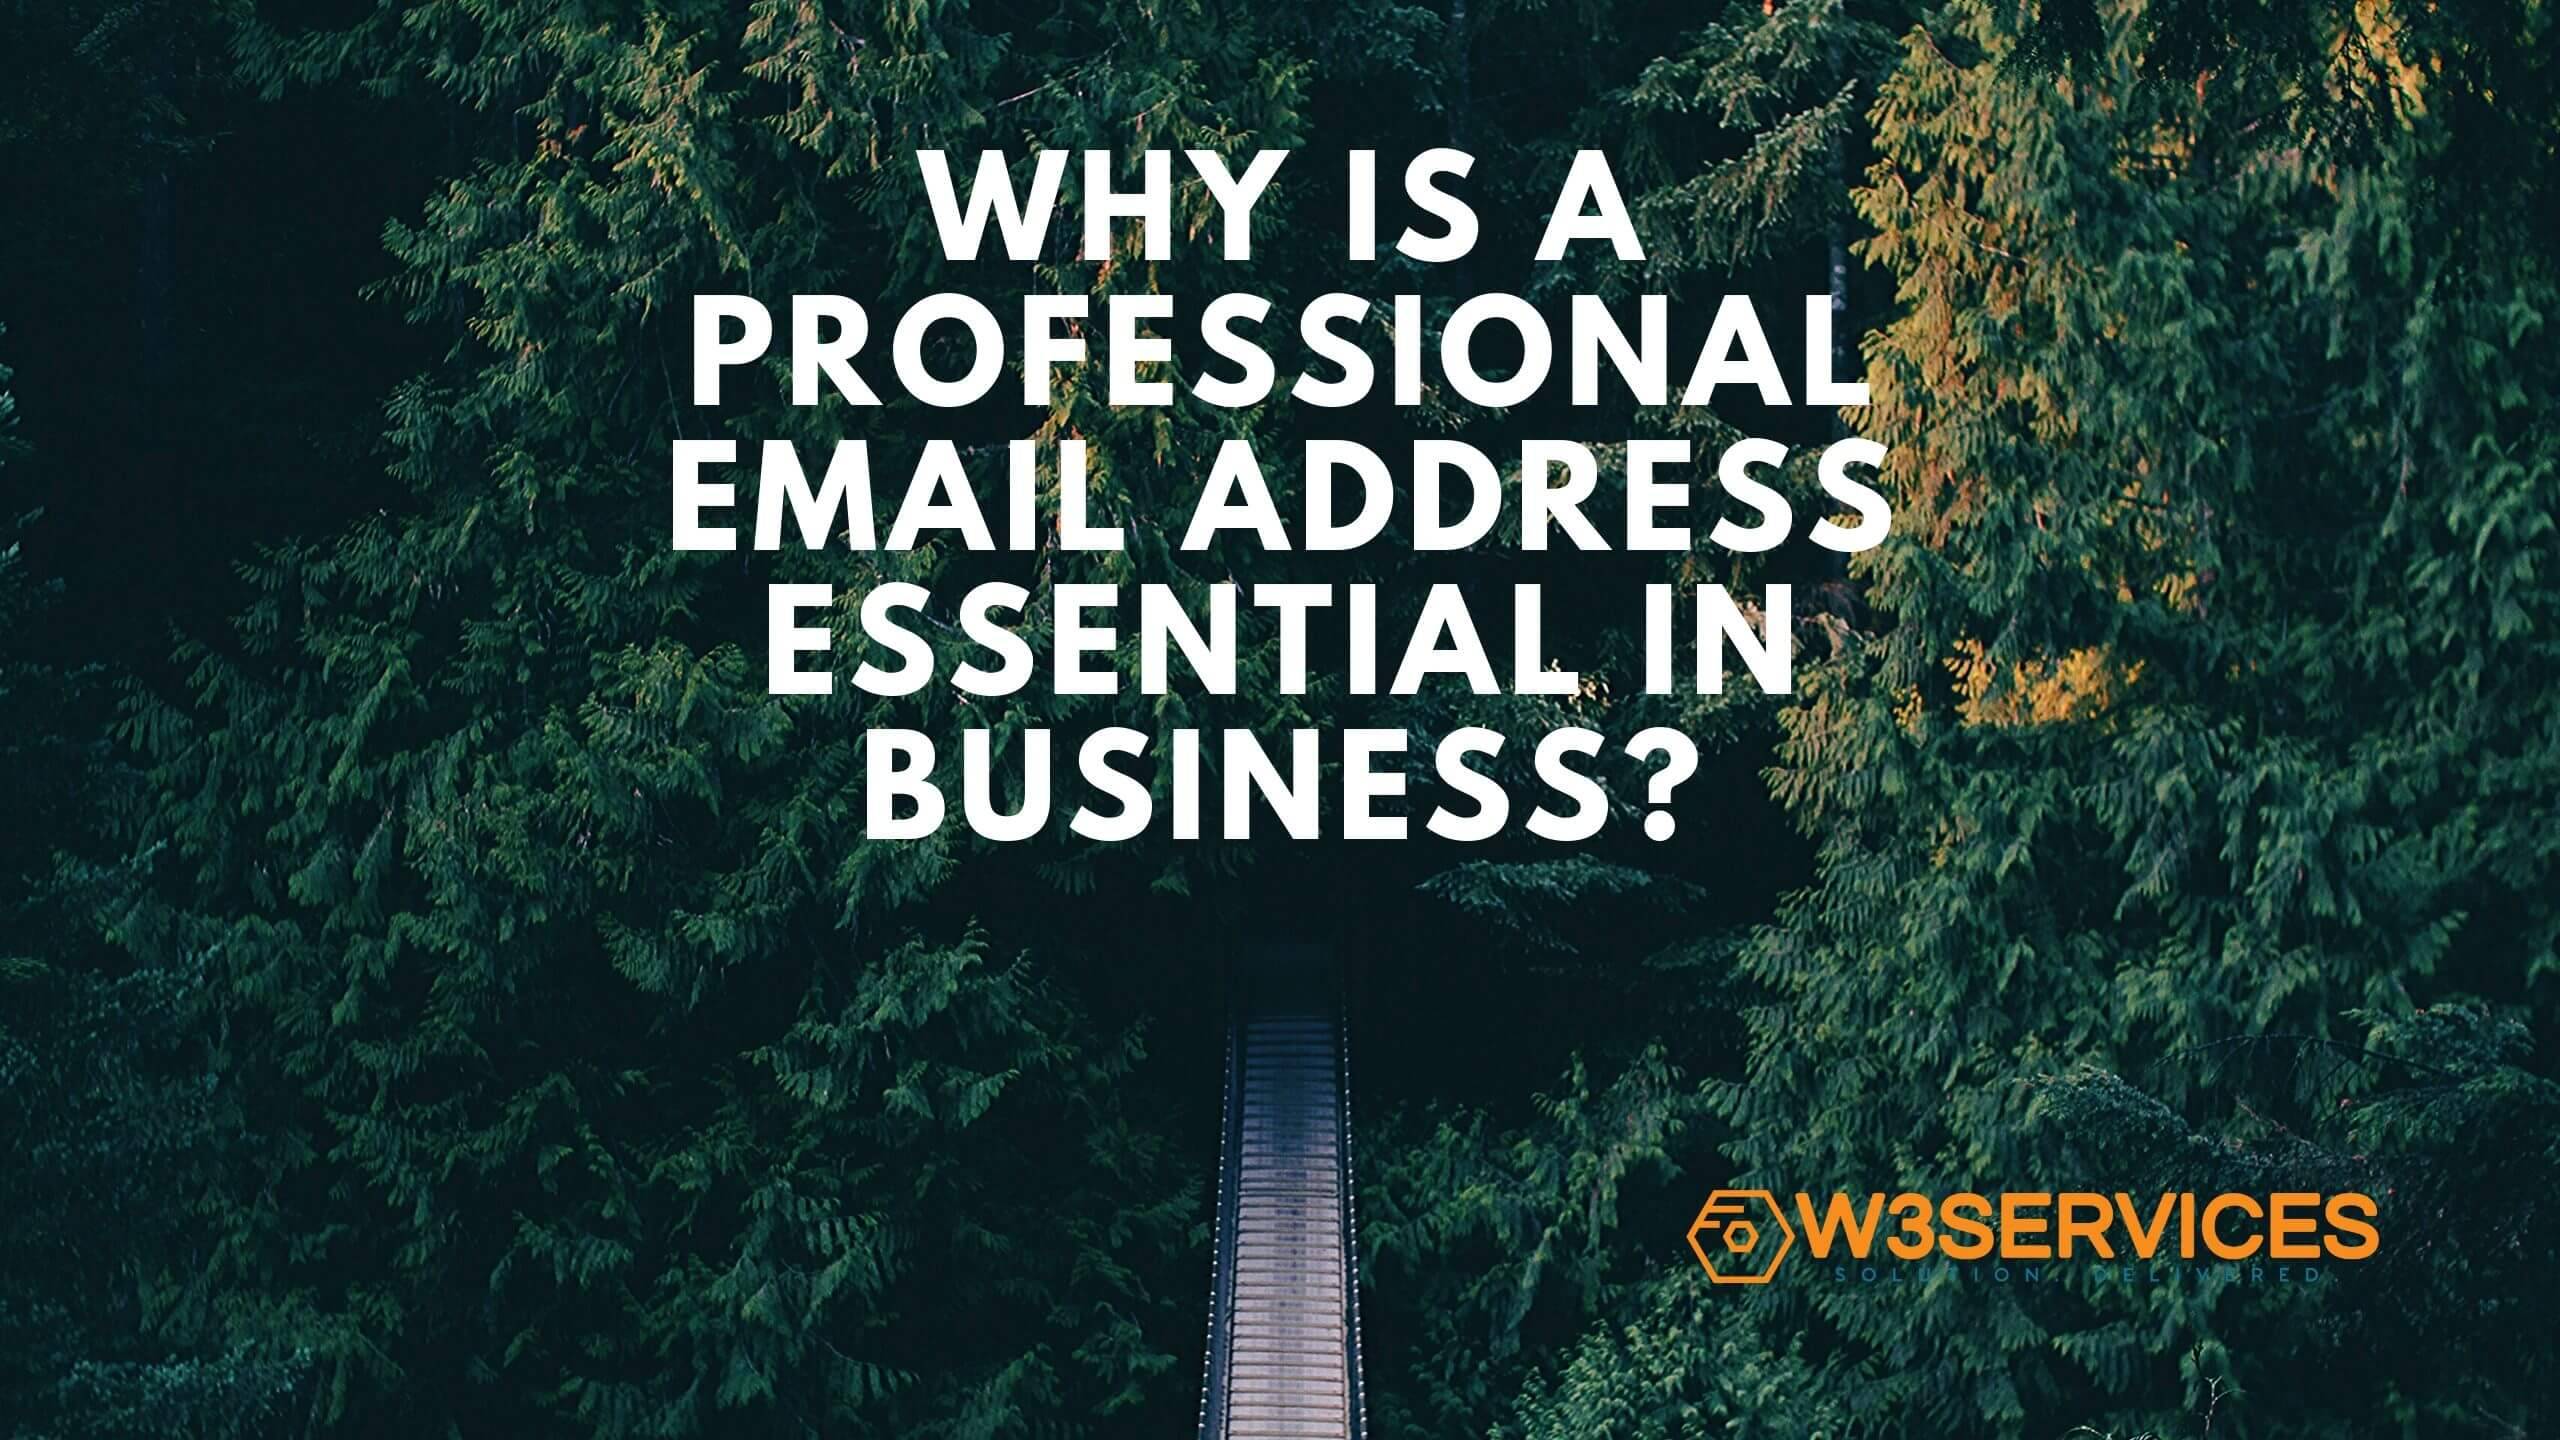 Why is a professional email address essential in business